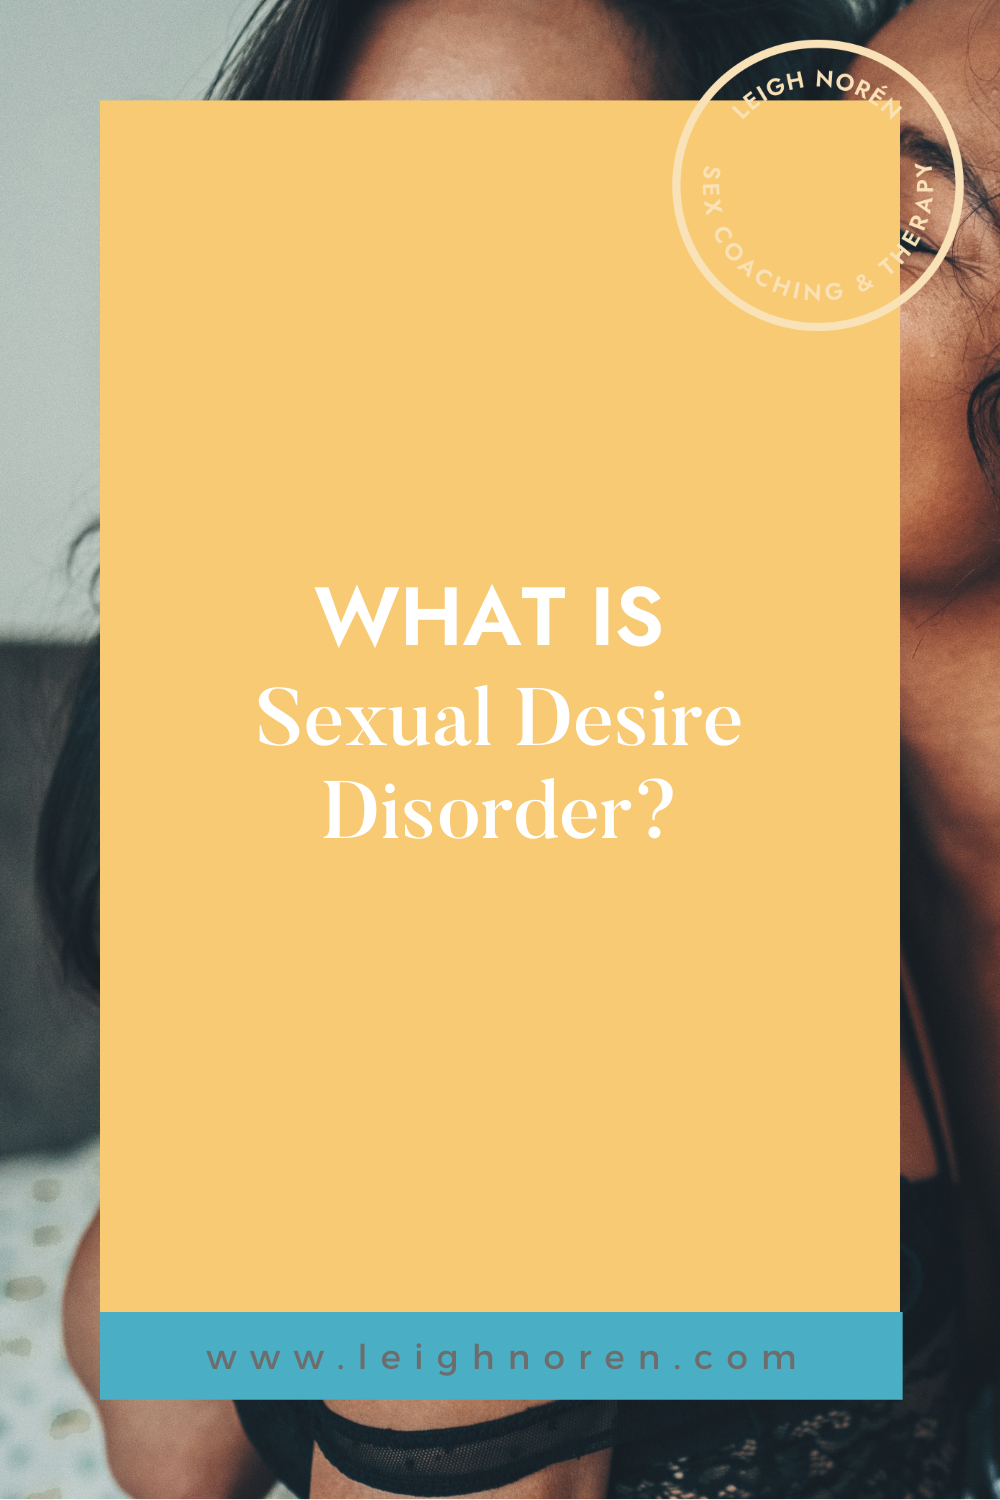 What is sexual desire disorder?